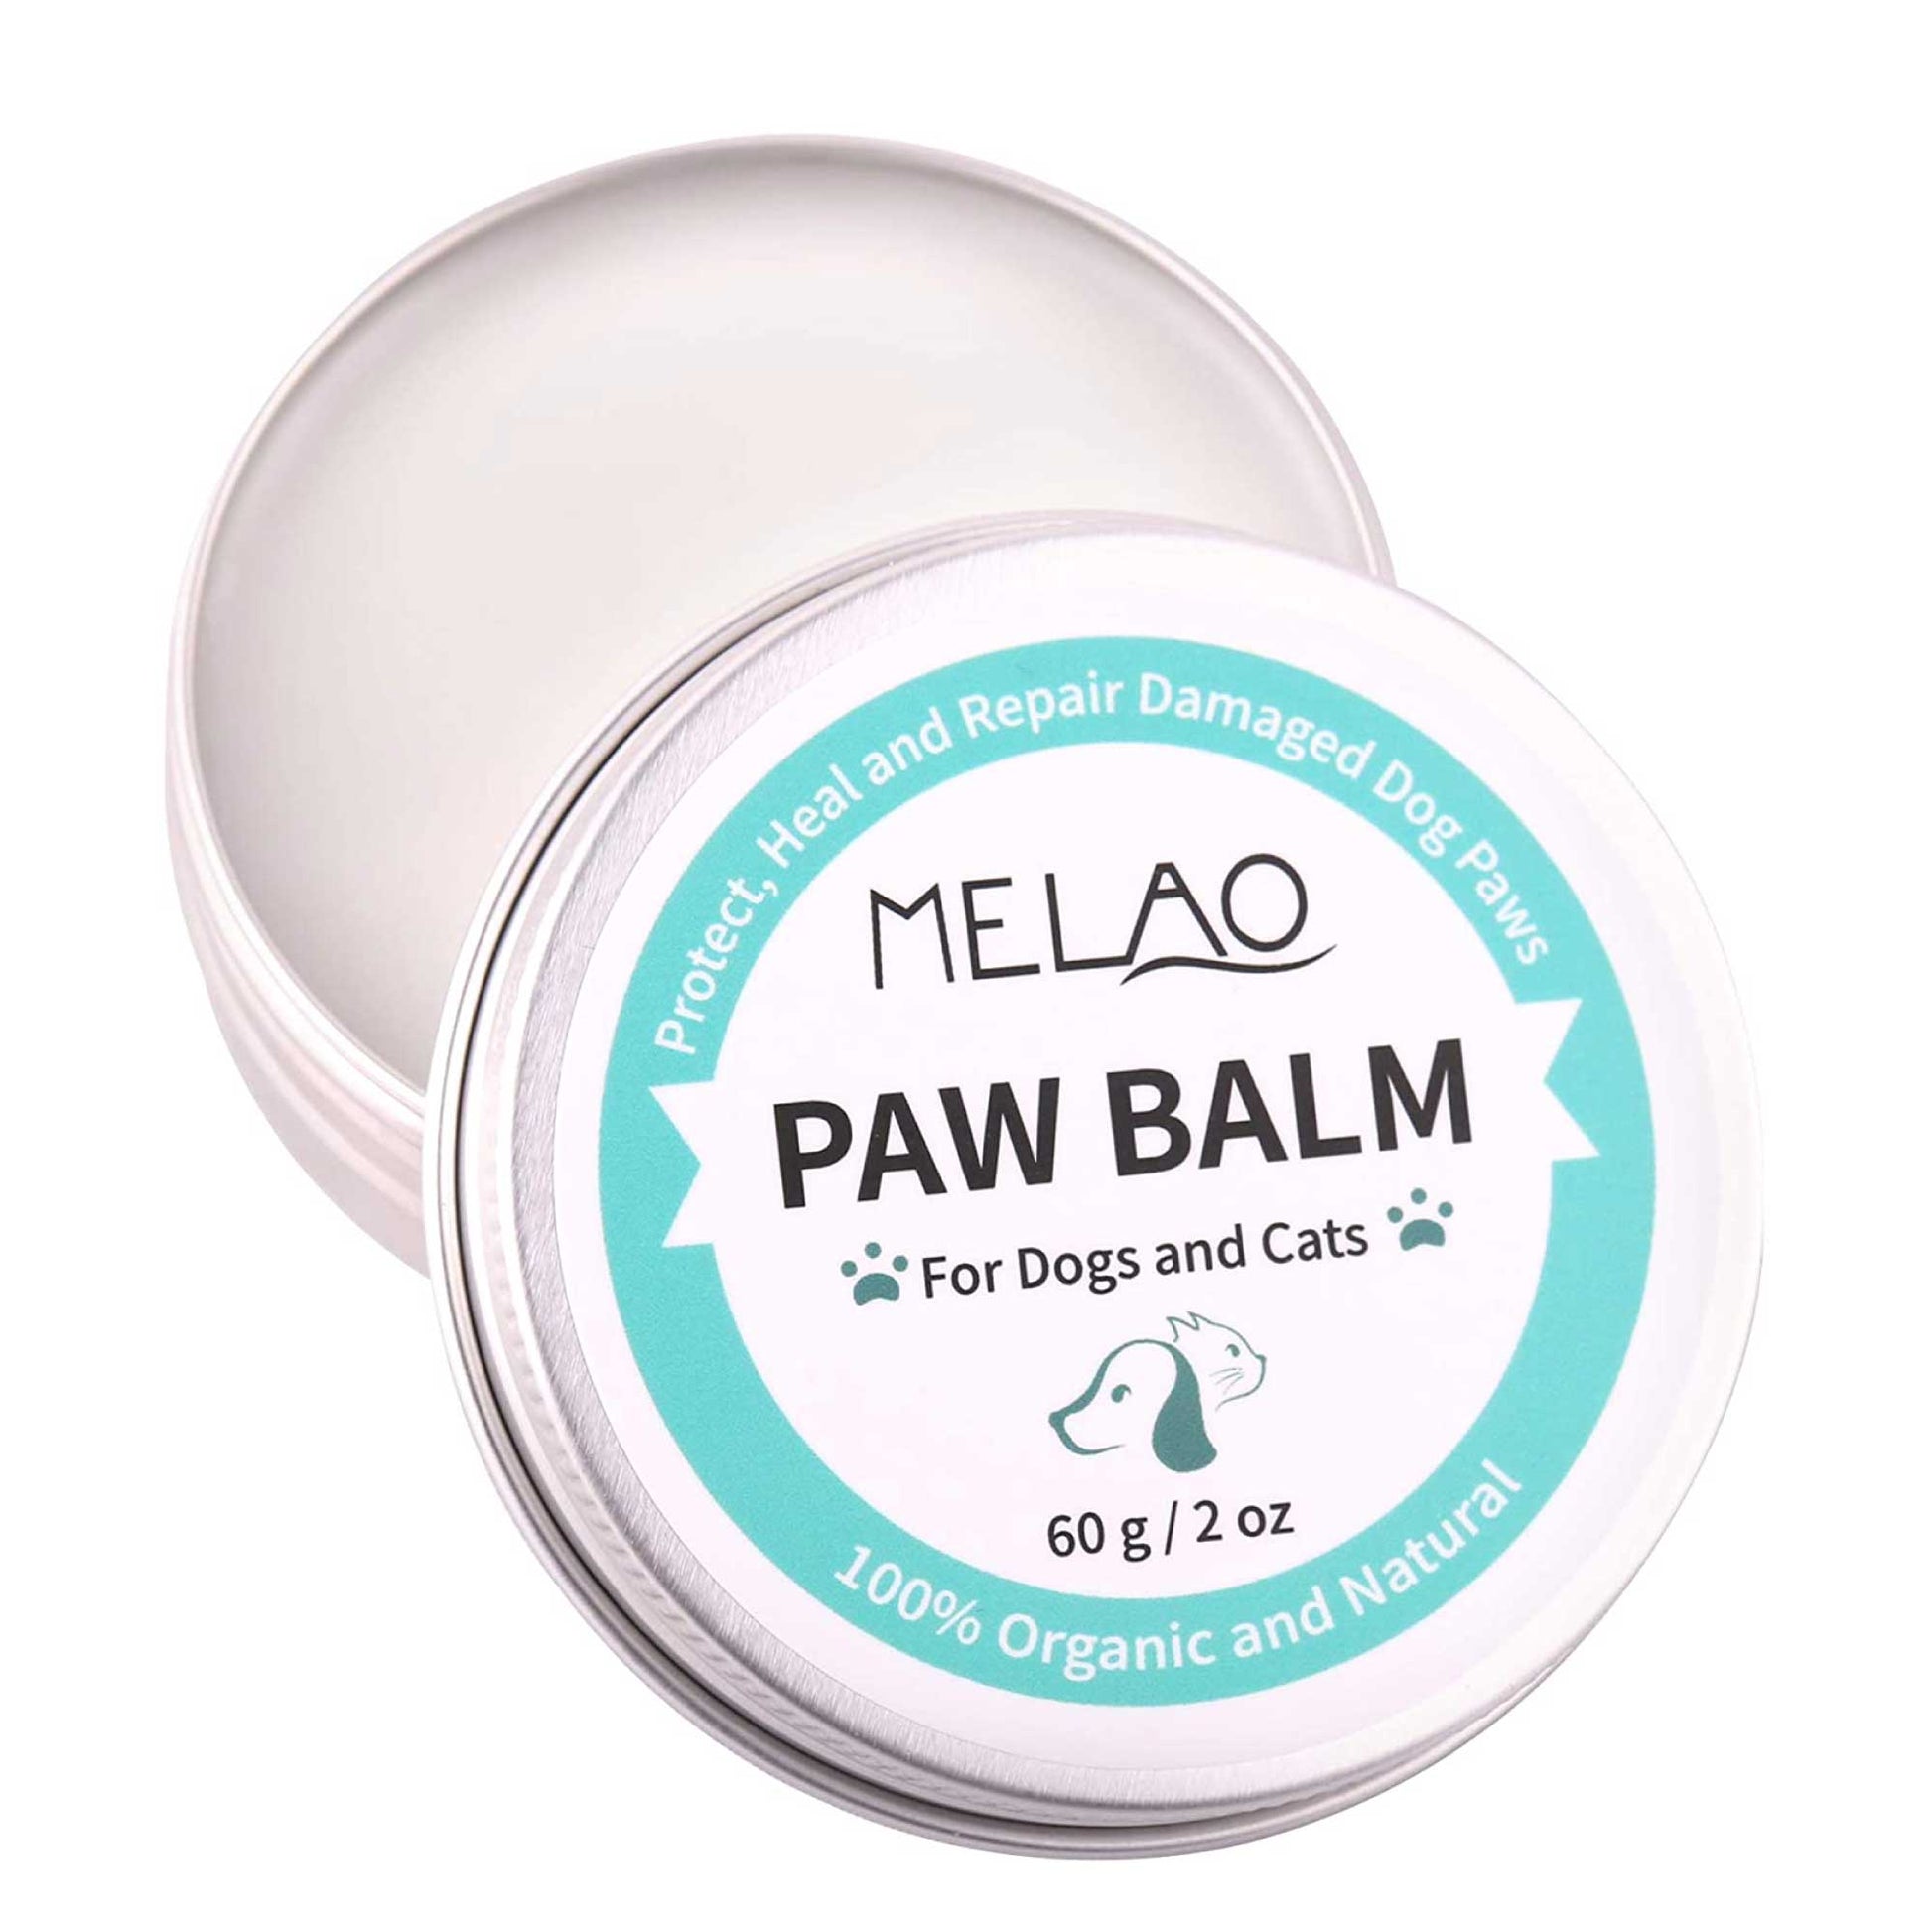 60g Pet Paw Balm - Dog or Cat Natural Organic Nose Soother Wax Ointment Cream-1